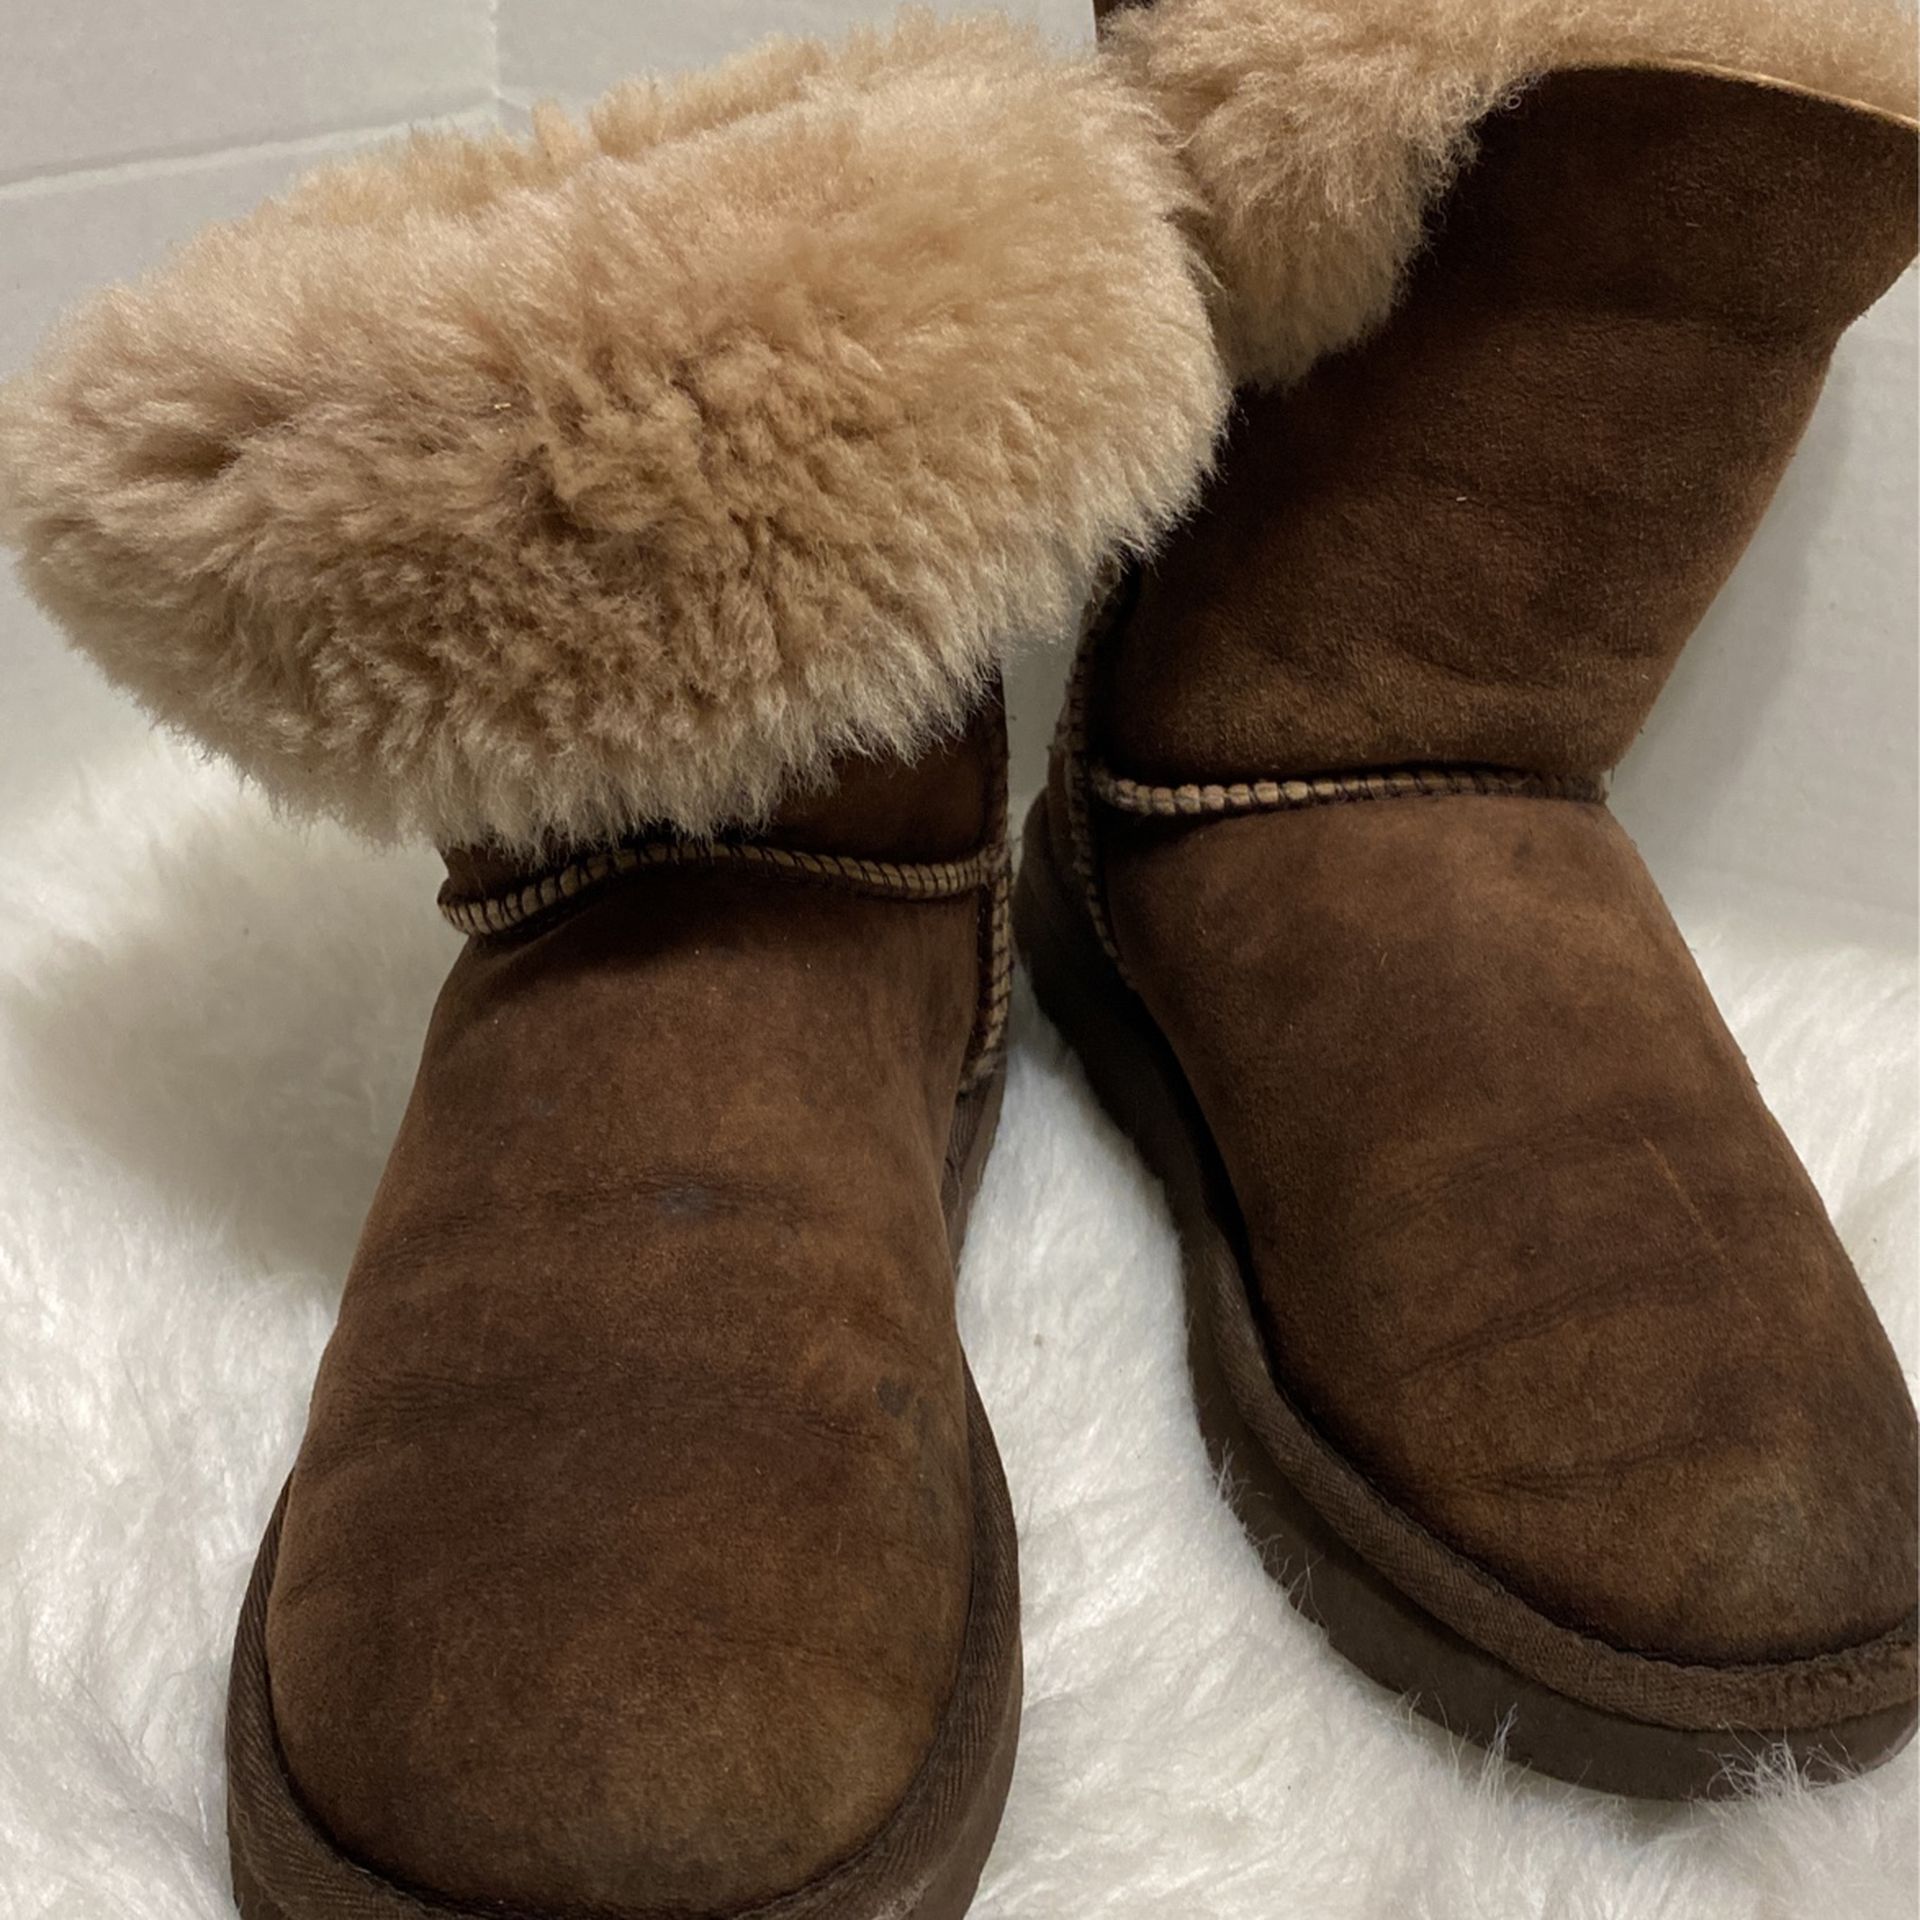 UGG Womens 7 Nash Pull On Classic Short Snow Boots Brown Suede Sheepskin 1013491